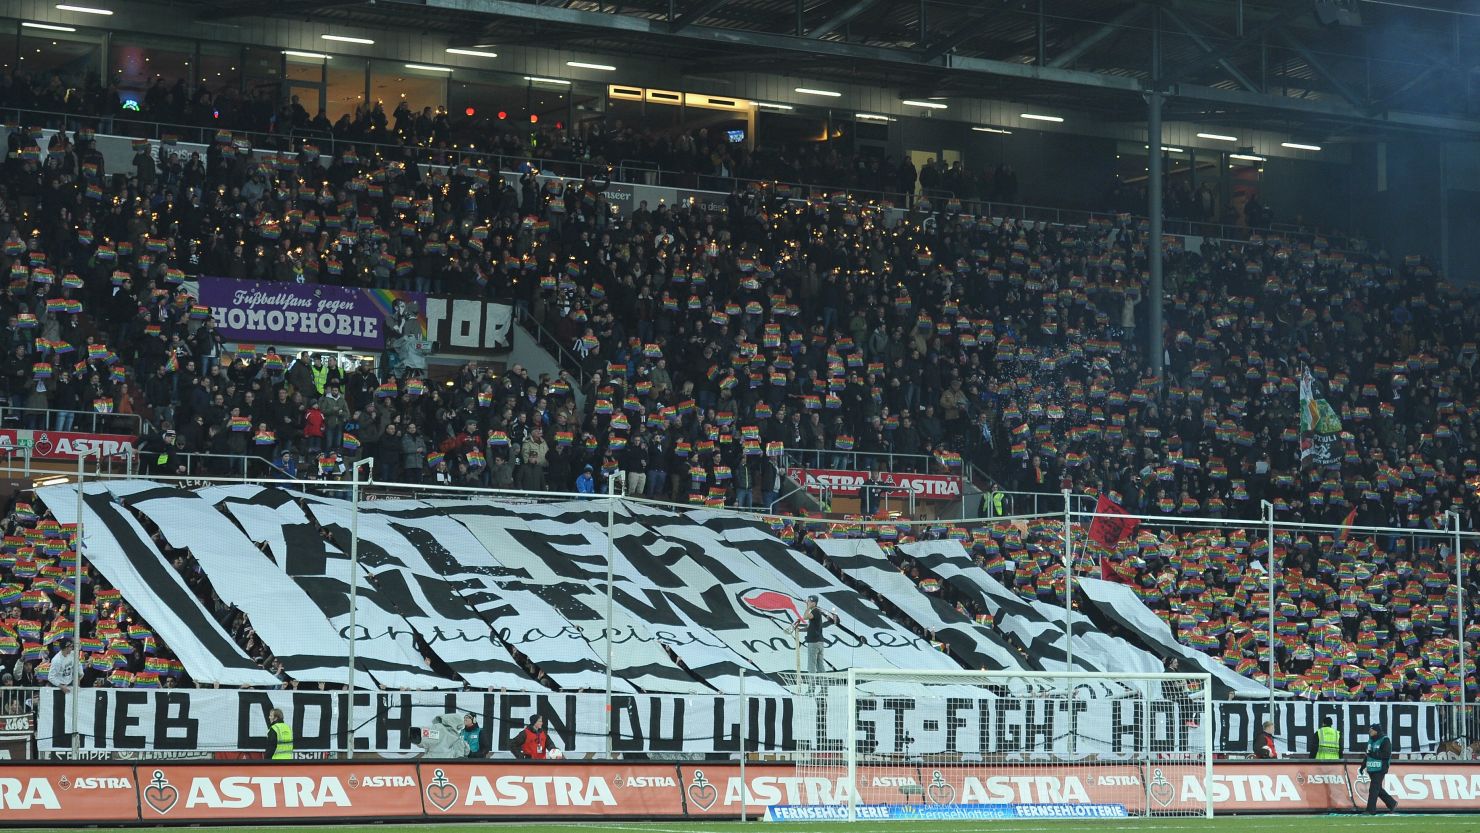 In a game last season, St. Pauli fans unfurled a banner and showed their support for members of the gay community. 